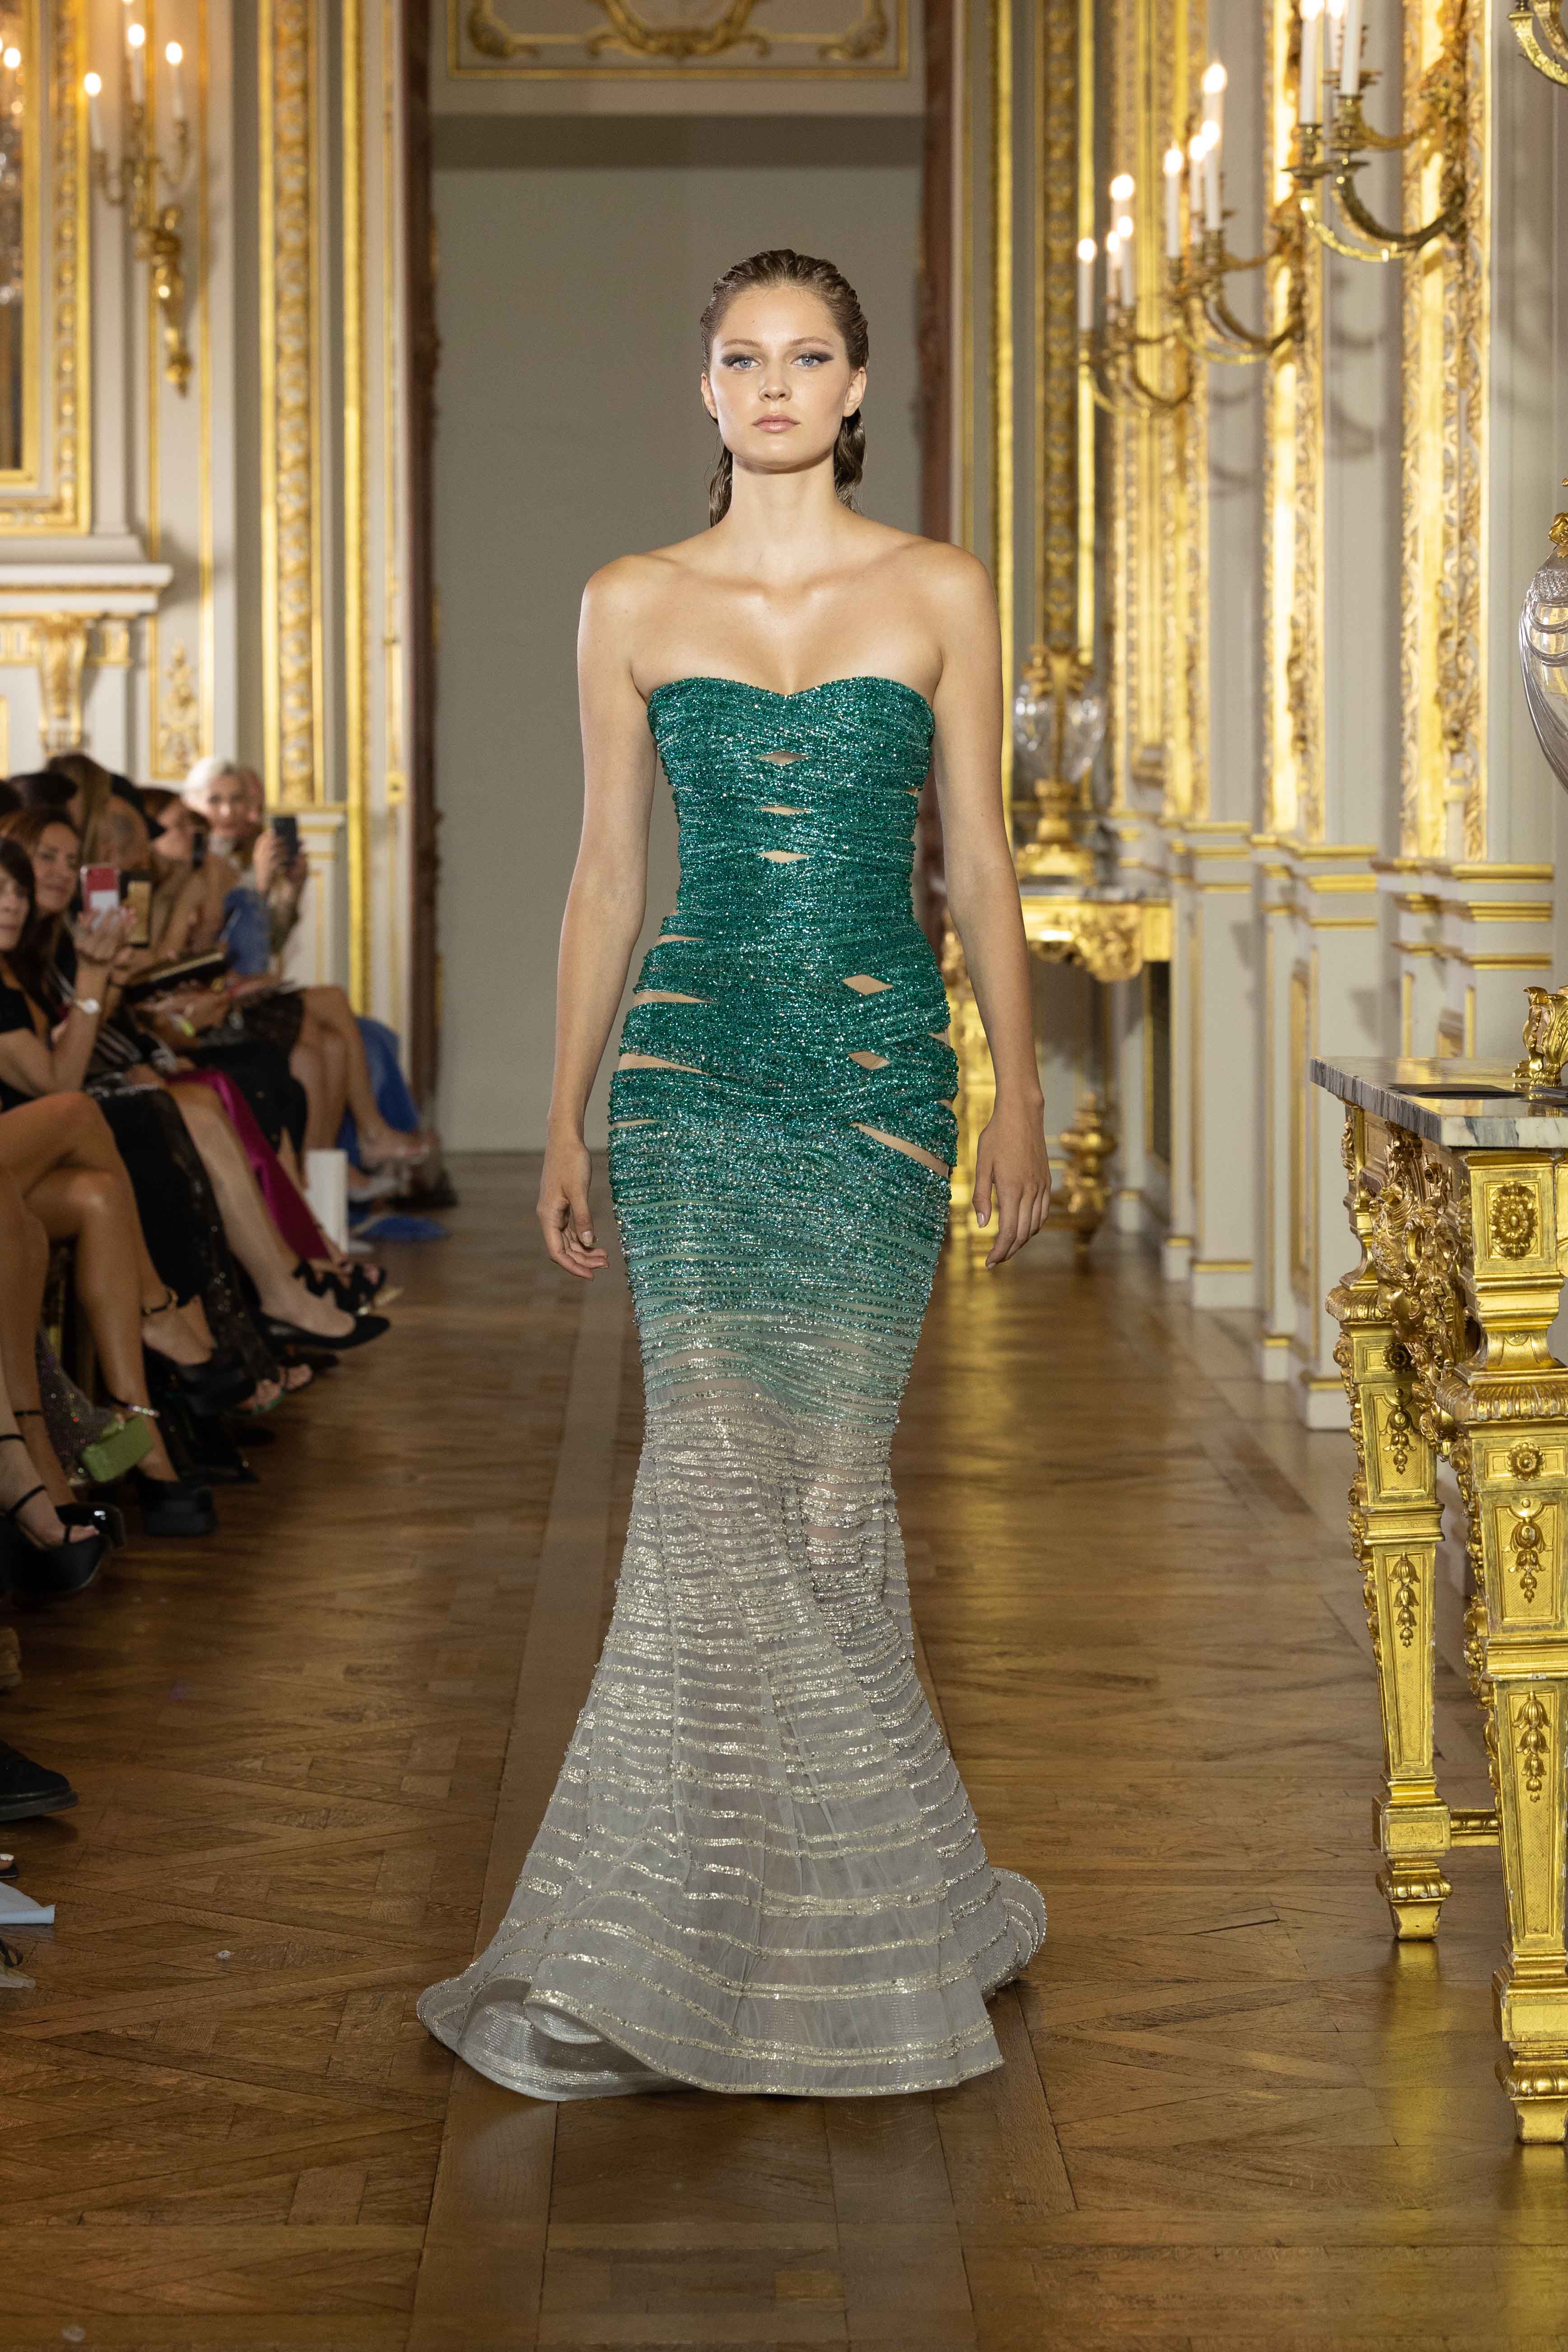 The Best From Paris Couture Week, Courtesy Of Arab Designers